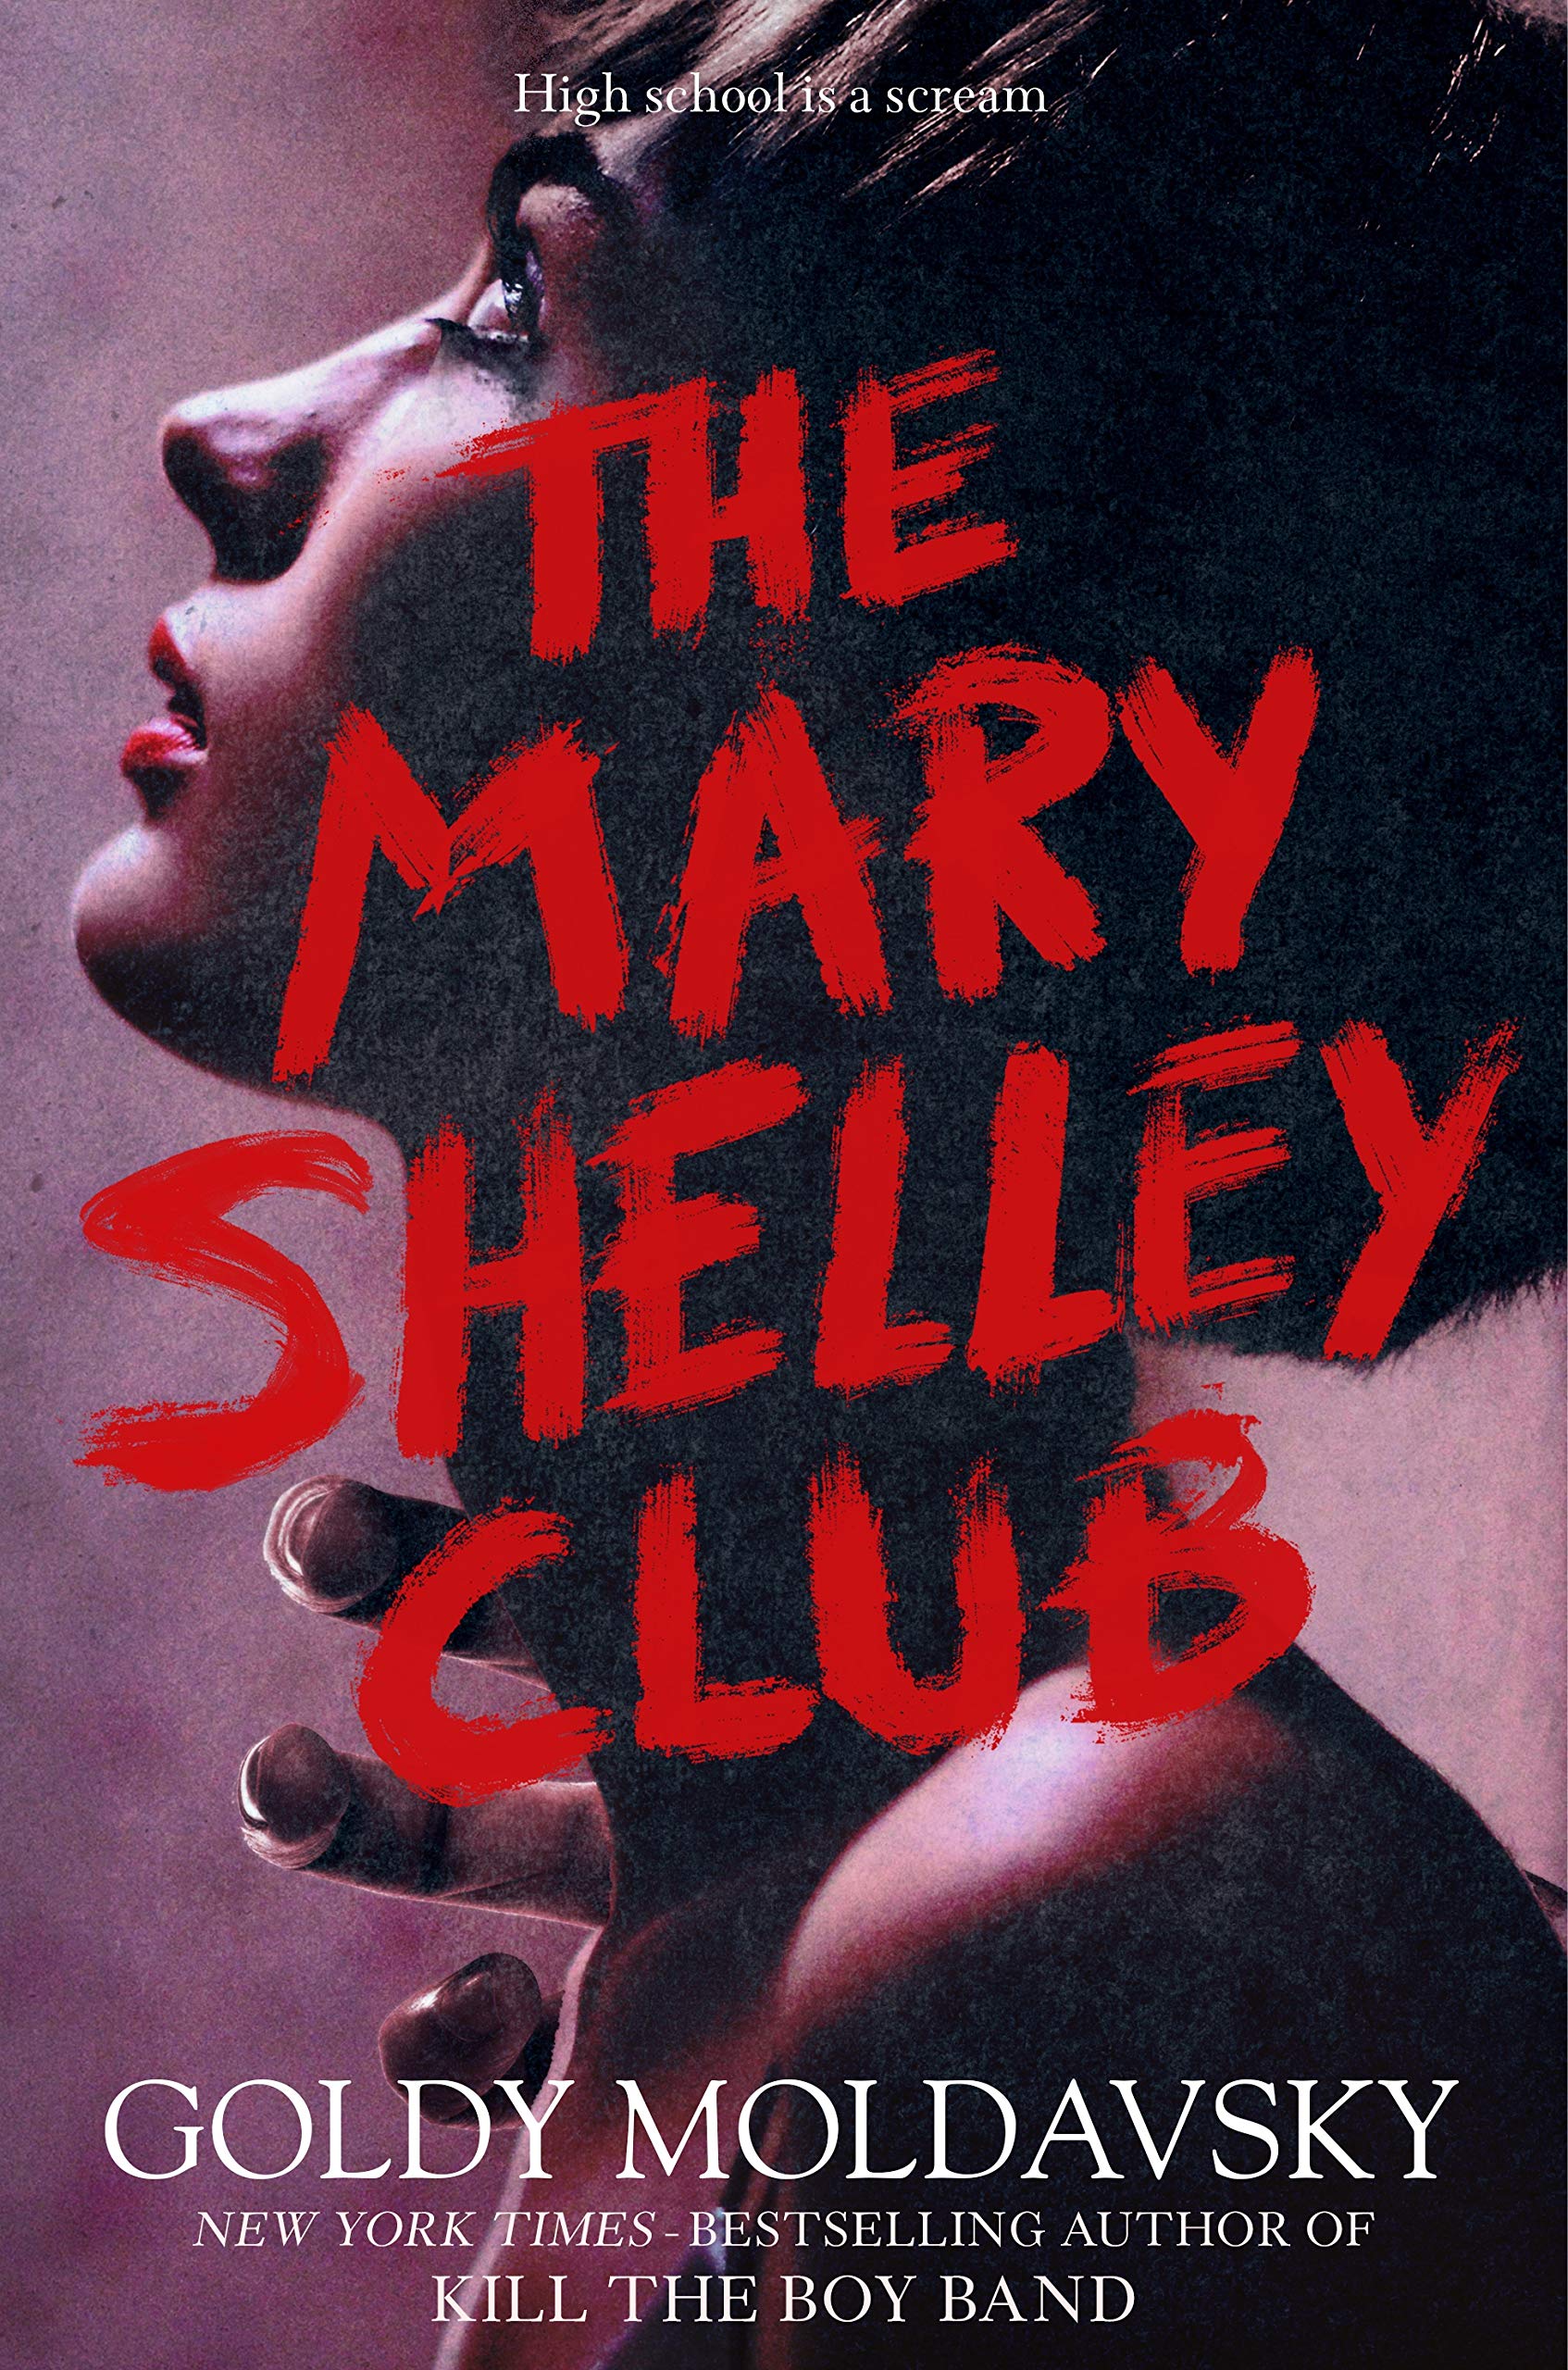 Cover of The Mary Shelley Club by Goldy Moldavsky; side of a woman's face. She is cover in shadows and wearing red lipstick and mascara. A hand is reaching for her neck.